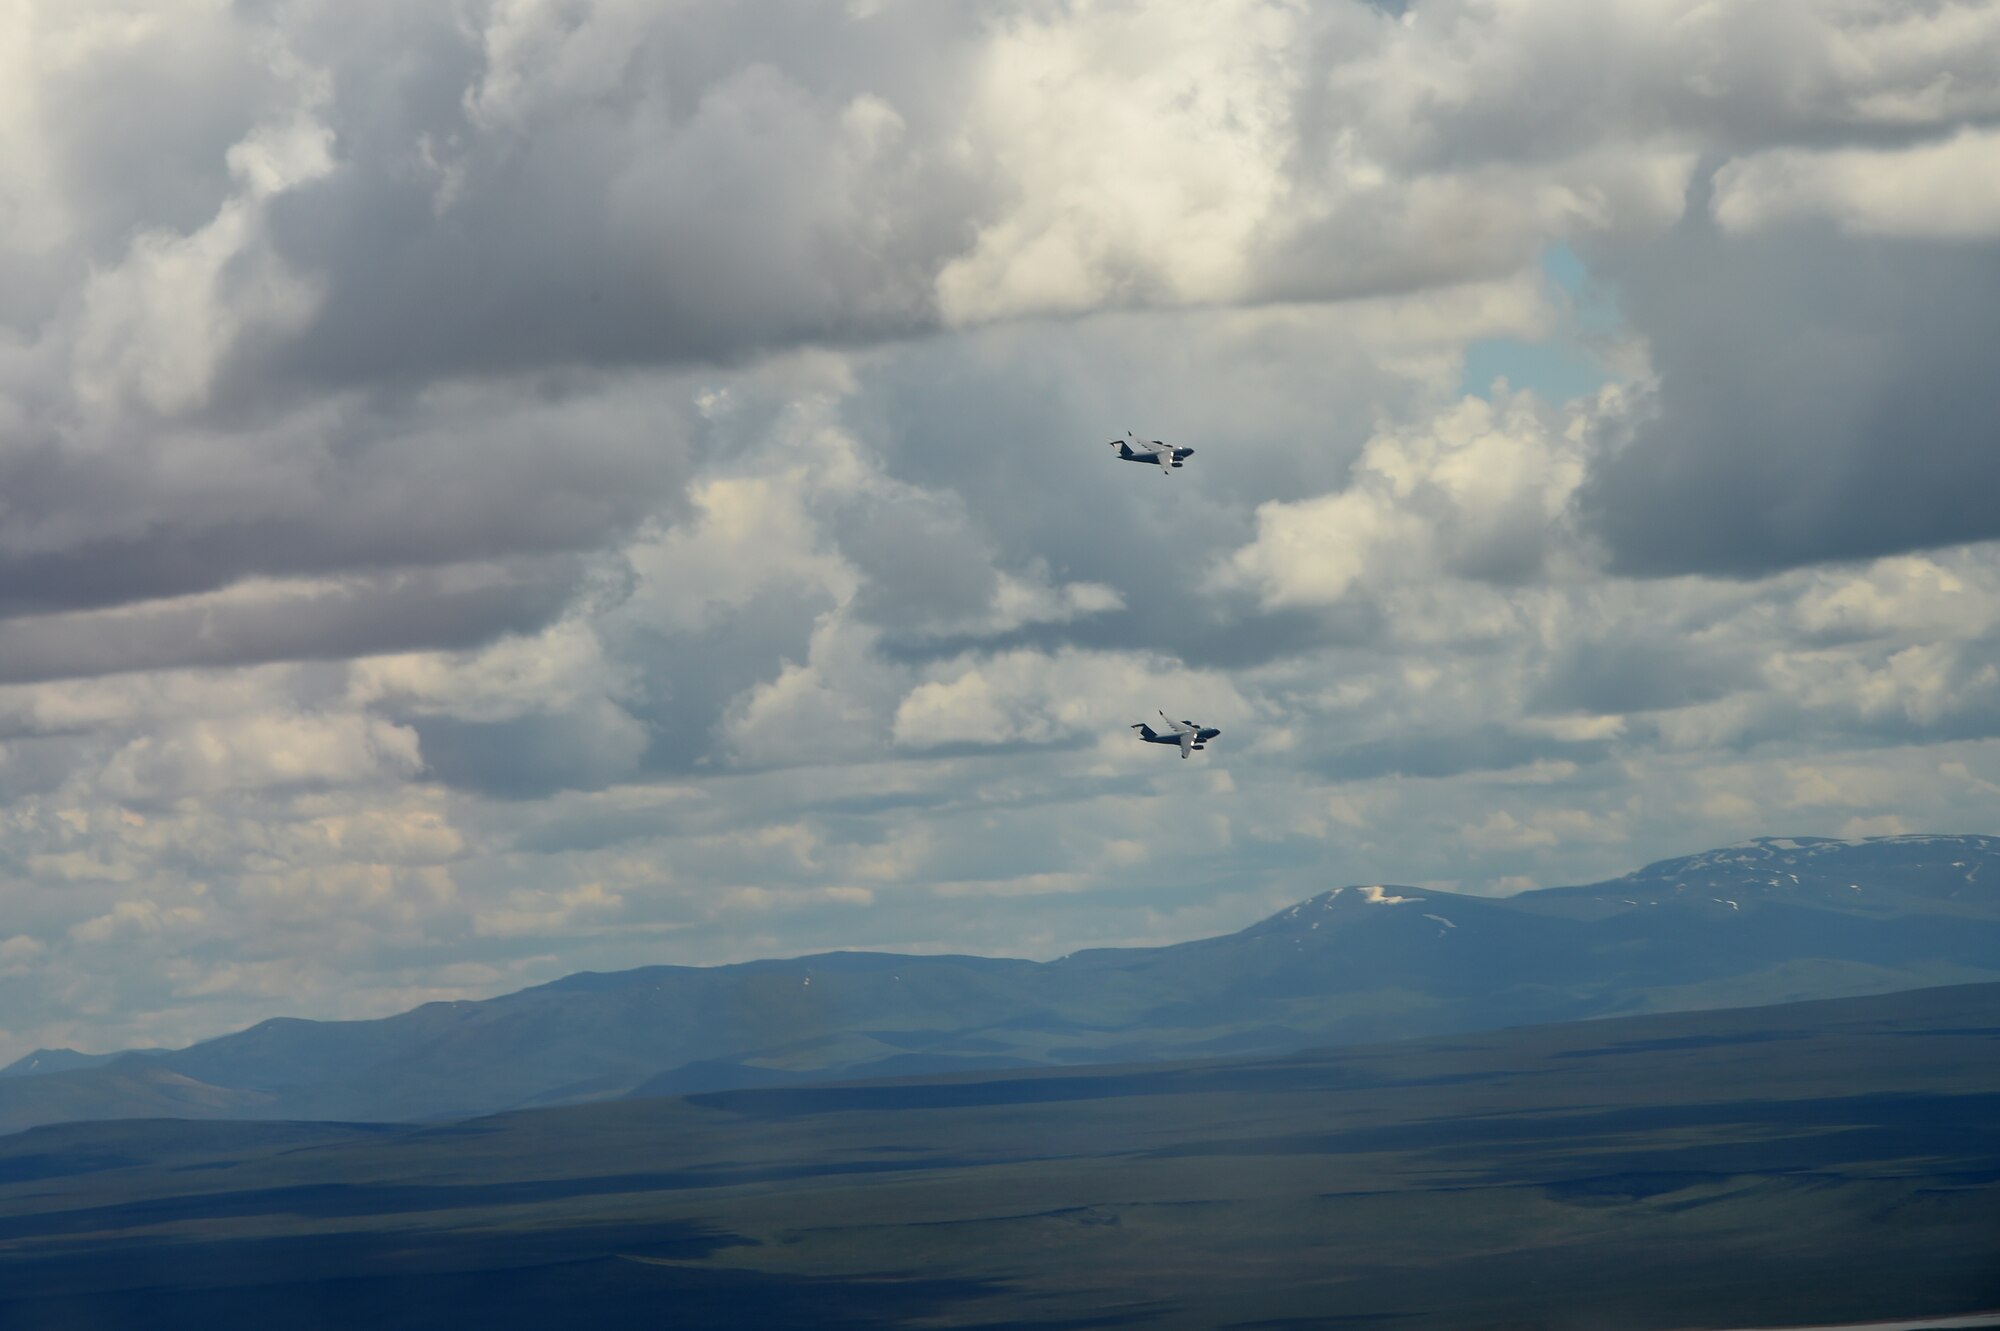 Two McChord C-17 Globemaster IIIs fly over the Mountain Home Range Complex, Idaho, May 17, 2016. The McChord tails were two of seven C-17s working with F-15 Strike Eagles C-17s in training as part of a Large Force Exercise at the Mountain Home Range Complex in preparation for Air Mobility Command’s next generation exercise Mobility Guardian. (U.S. Air Force photo/Staff Sgt. Naomi Shipley)